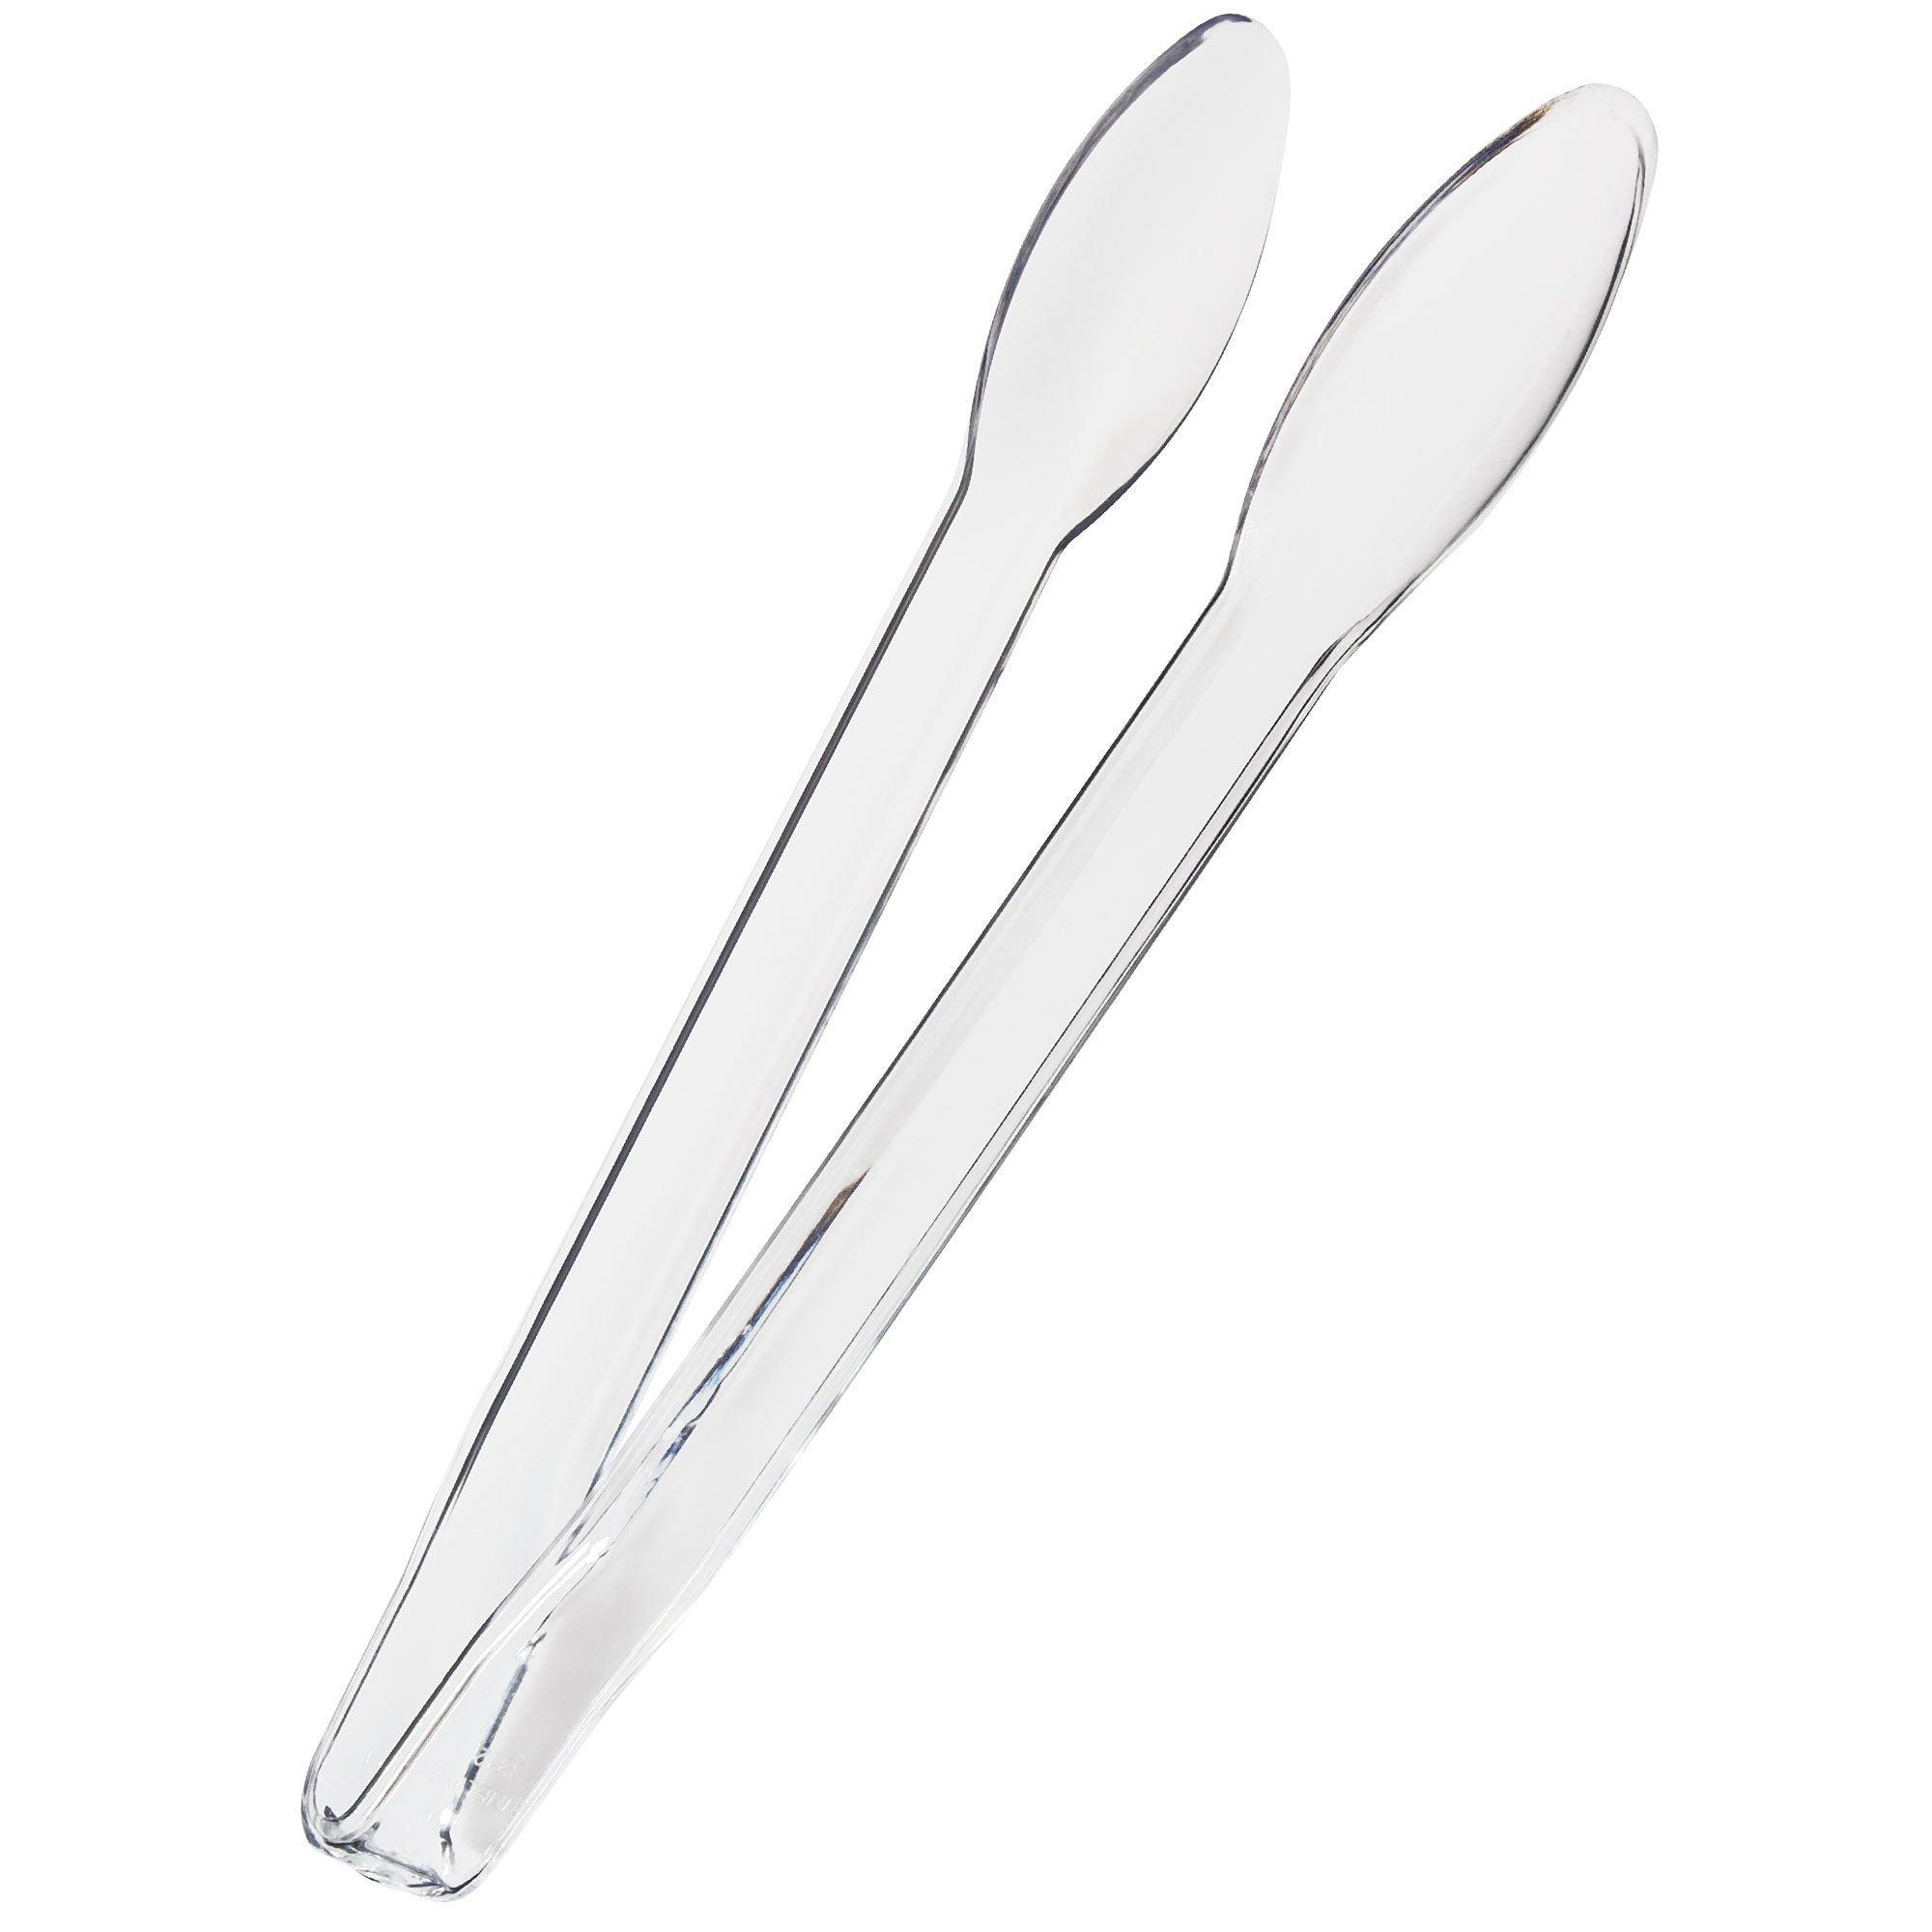 EcoQuality Disposable Clear Plastic Buffet Serving Tongs 7 inch, Serving Utensil Tongs, Appetizer Tongs, Heavy Duty Clear Kitchen Tongs, Small Ice Tongs